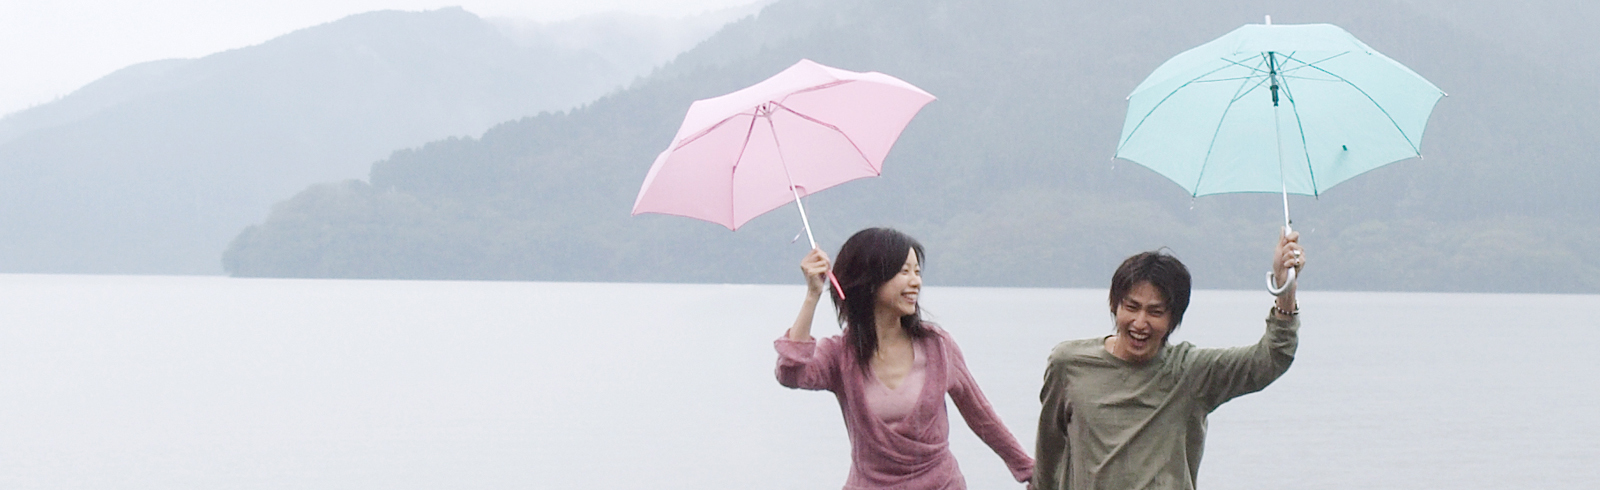 Couple holding an umbrella in the rain laughing